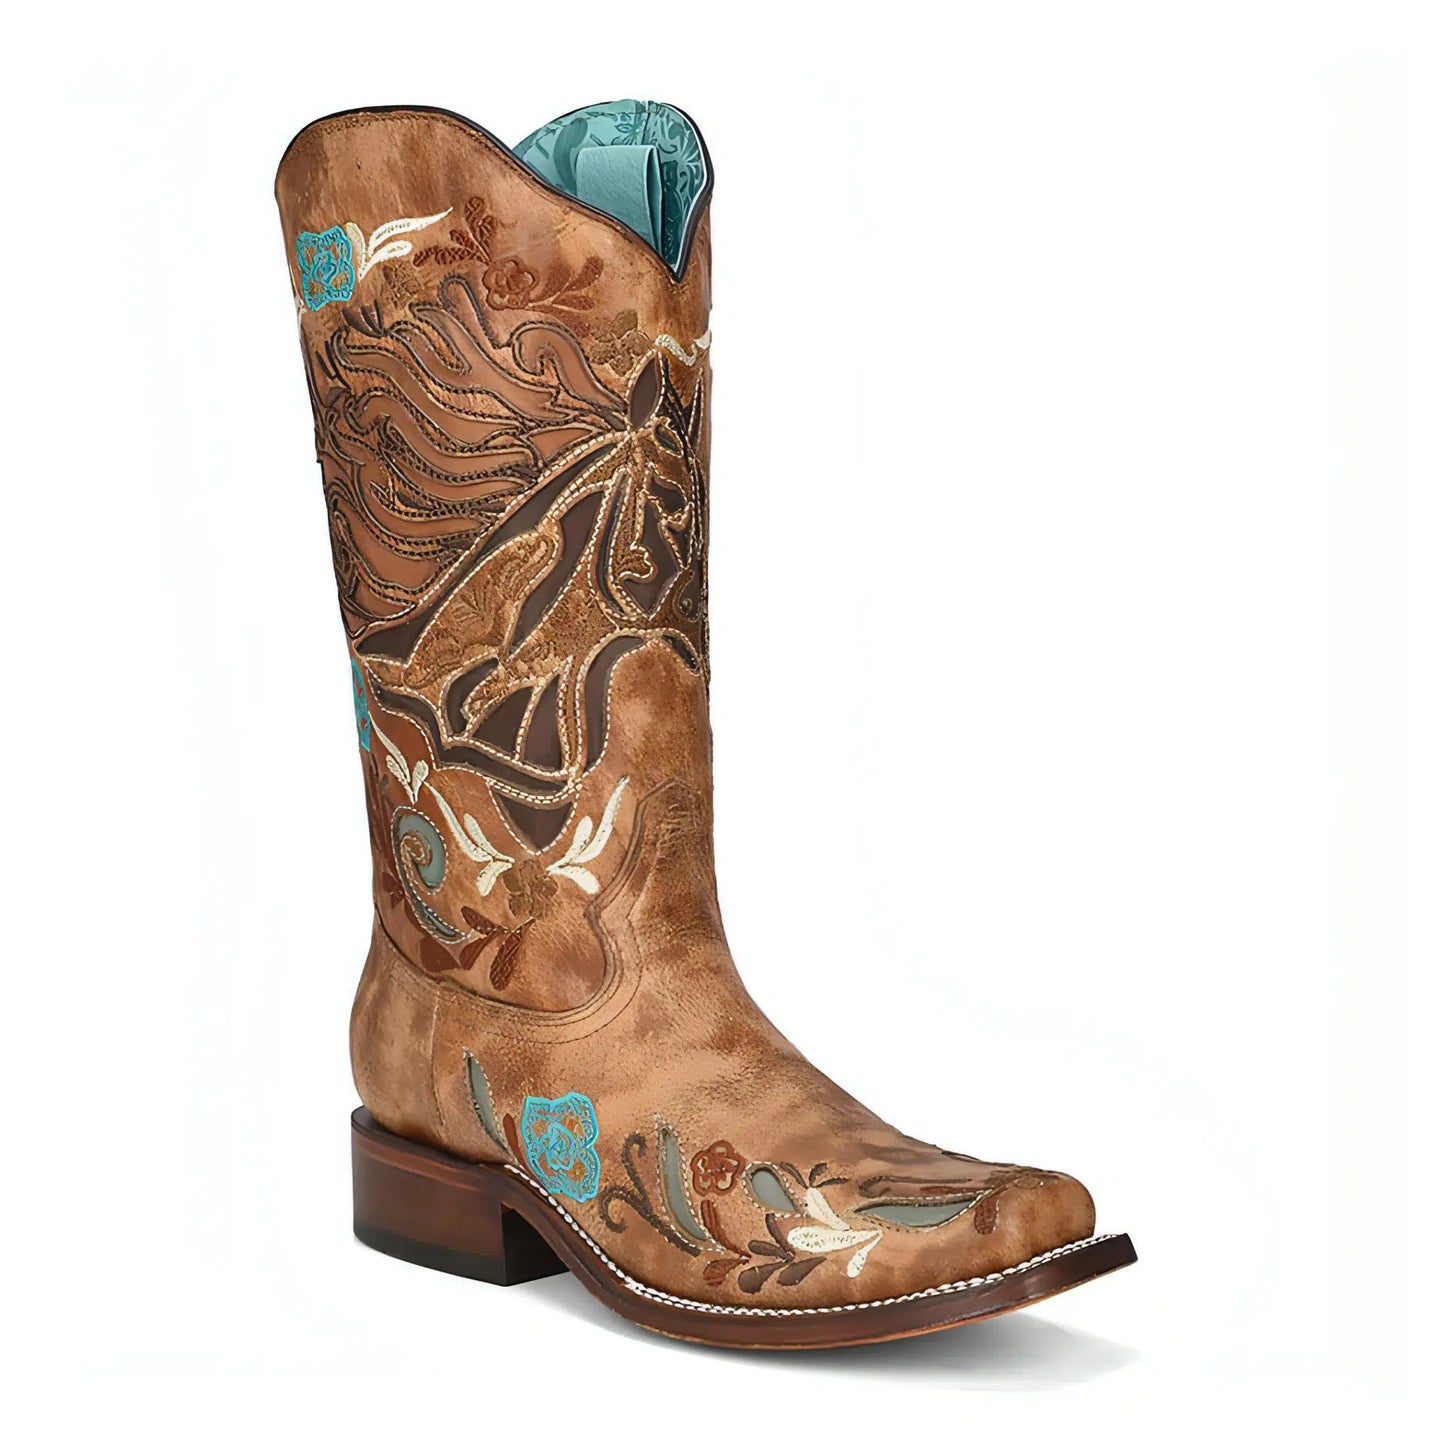 A4266 - M Corral brown western cowgirl leather boots for women-Kuet.us